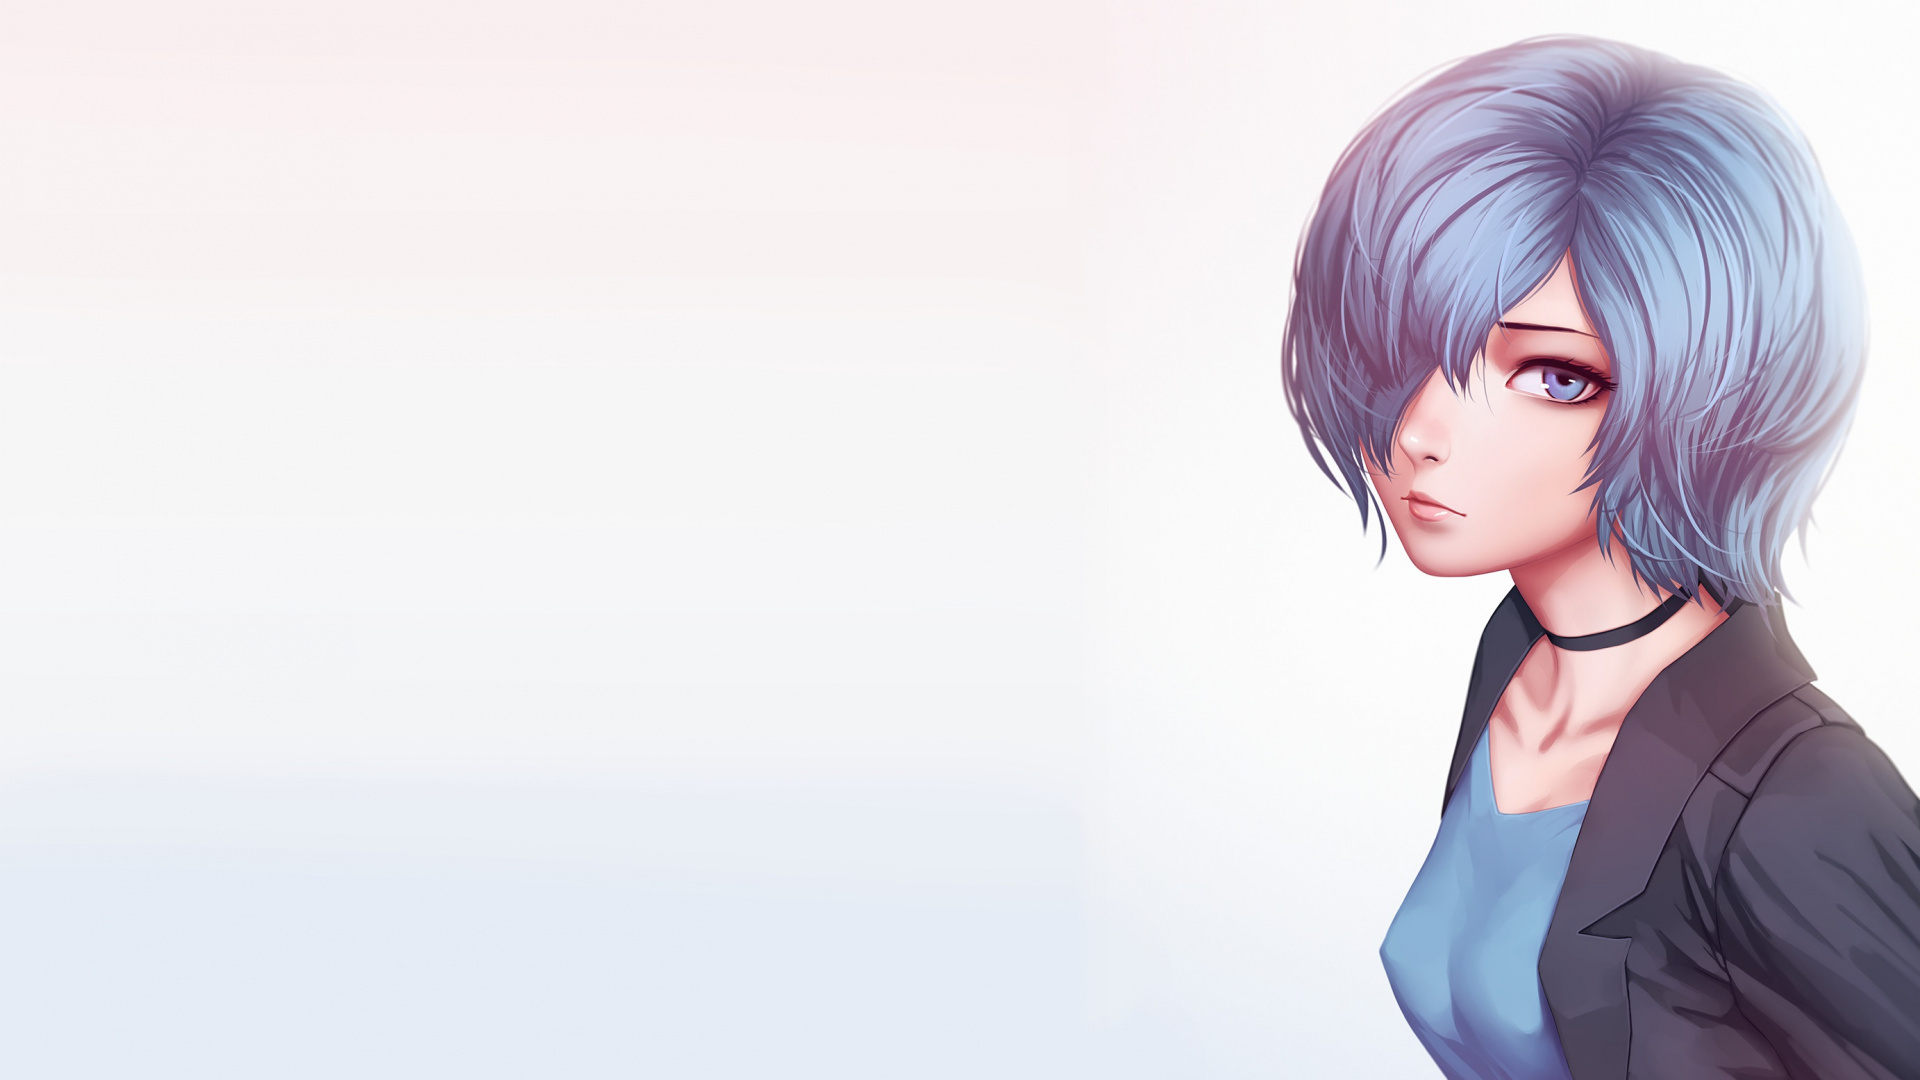 Femme en Chemise Bleue Personnage Anime. Wallpaper in 1920x1080 Resolution